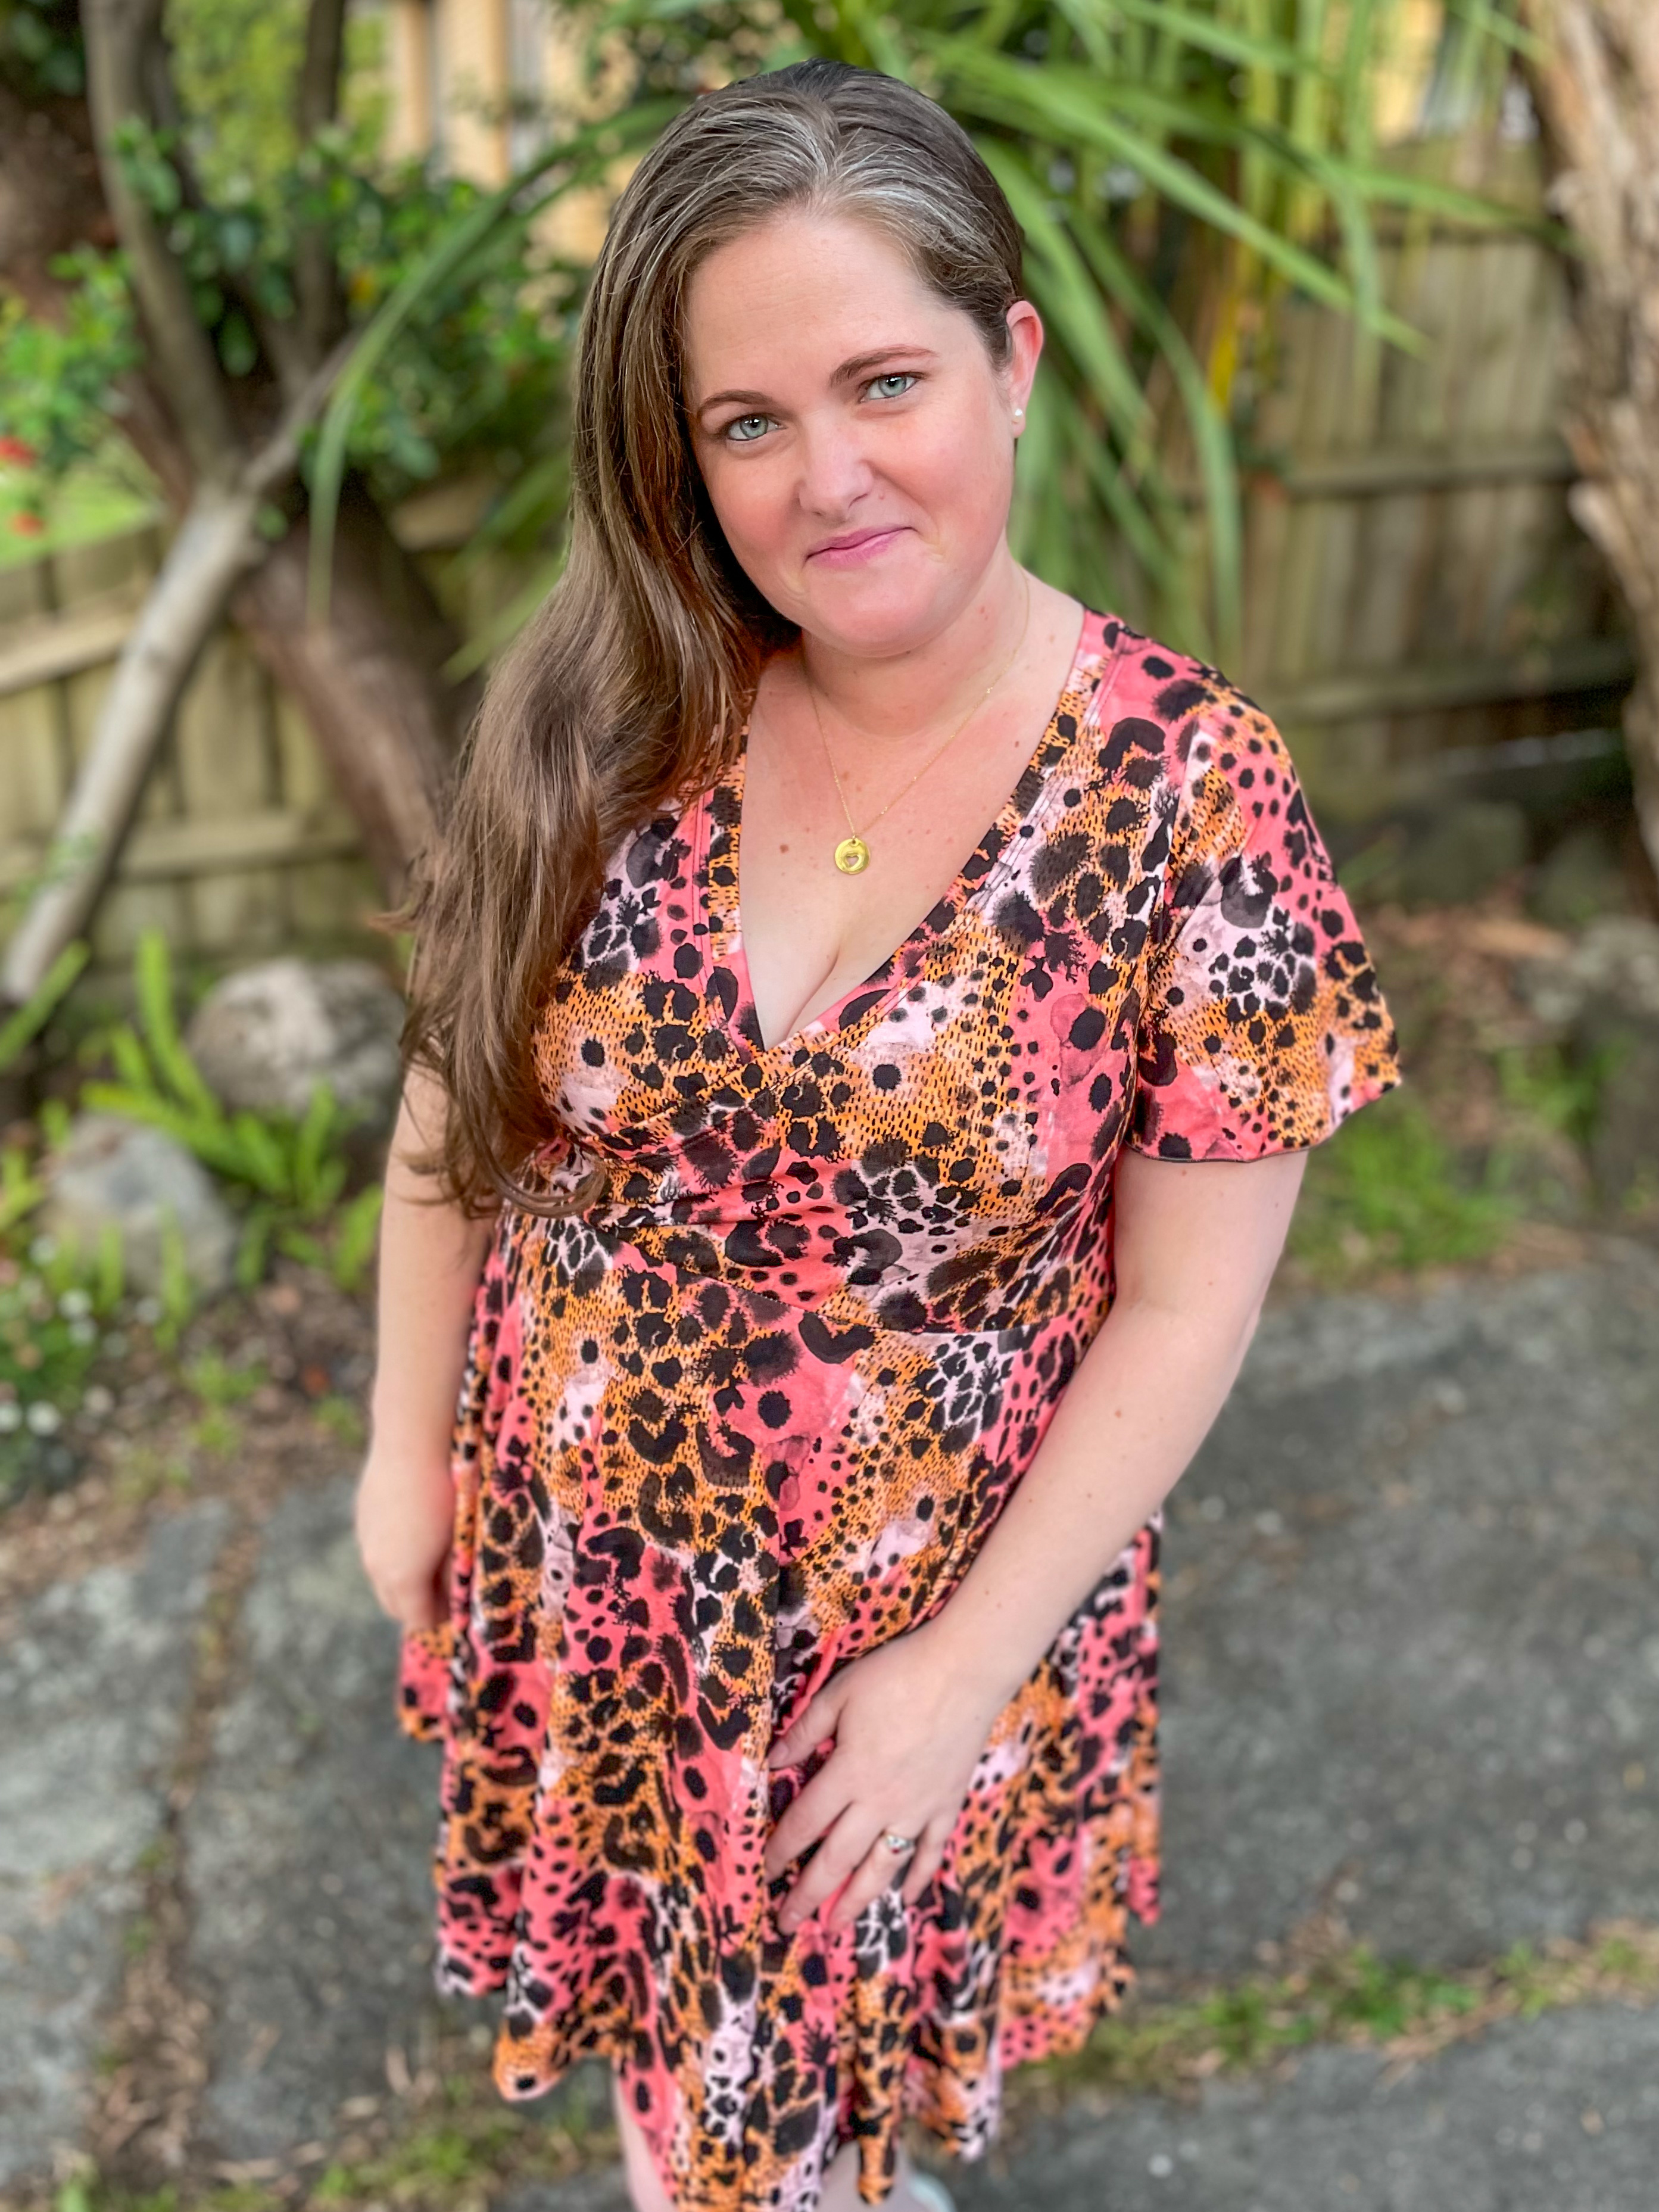 A woman in a leopard print dress smirks for a photo while standing outdoors